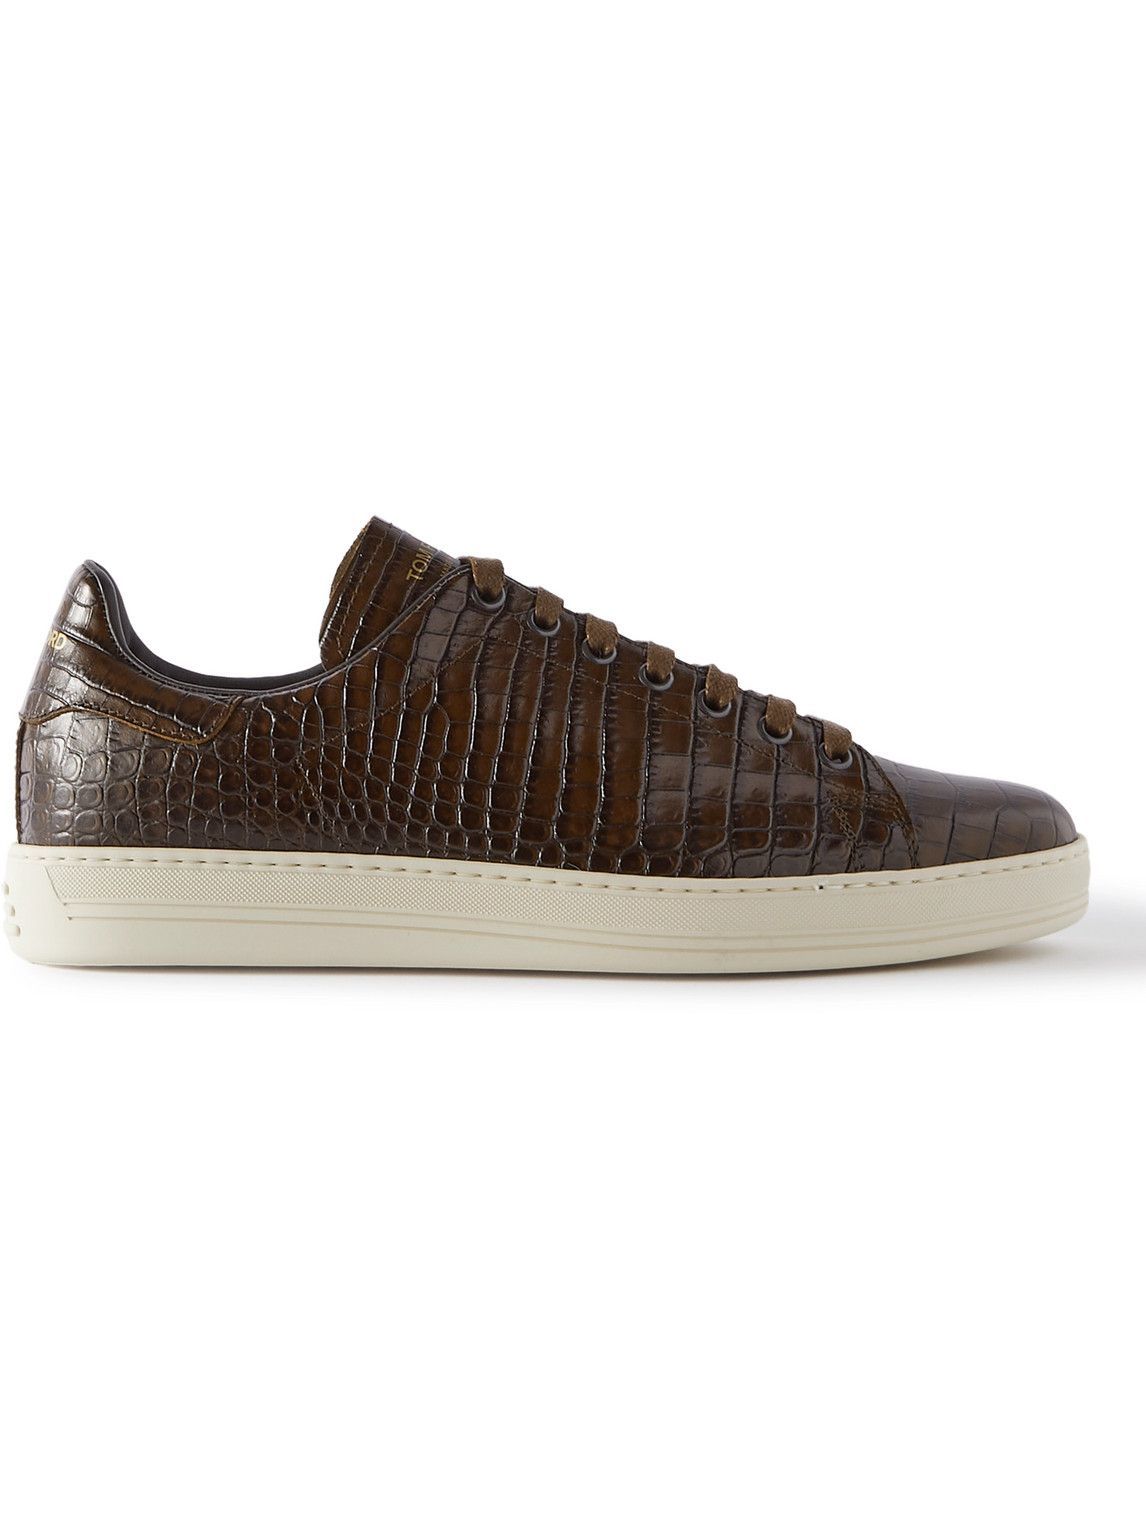 TOM FORD - Warwick Croc-Effect Leather Sneakers - Brown TOM FORD